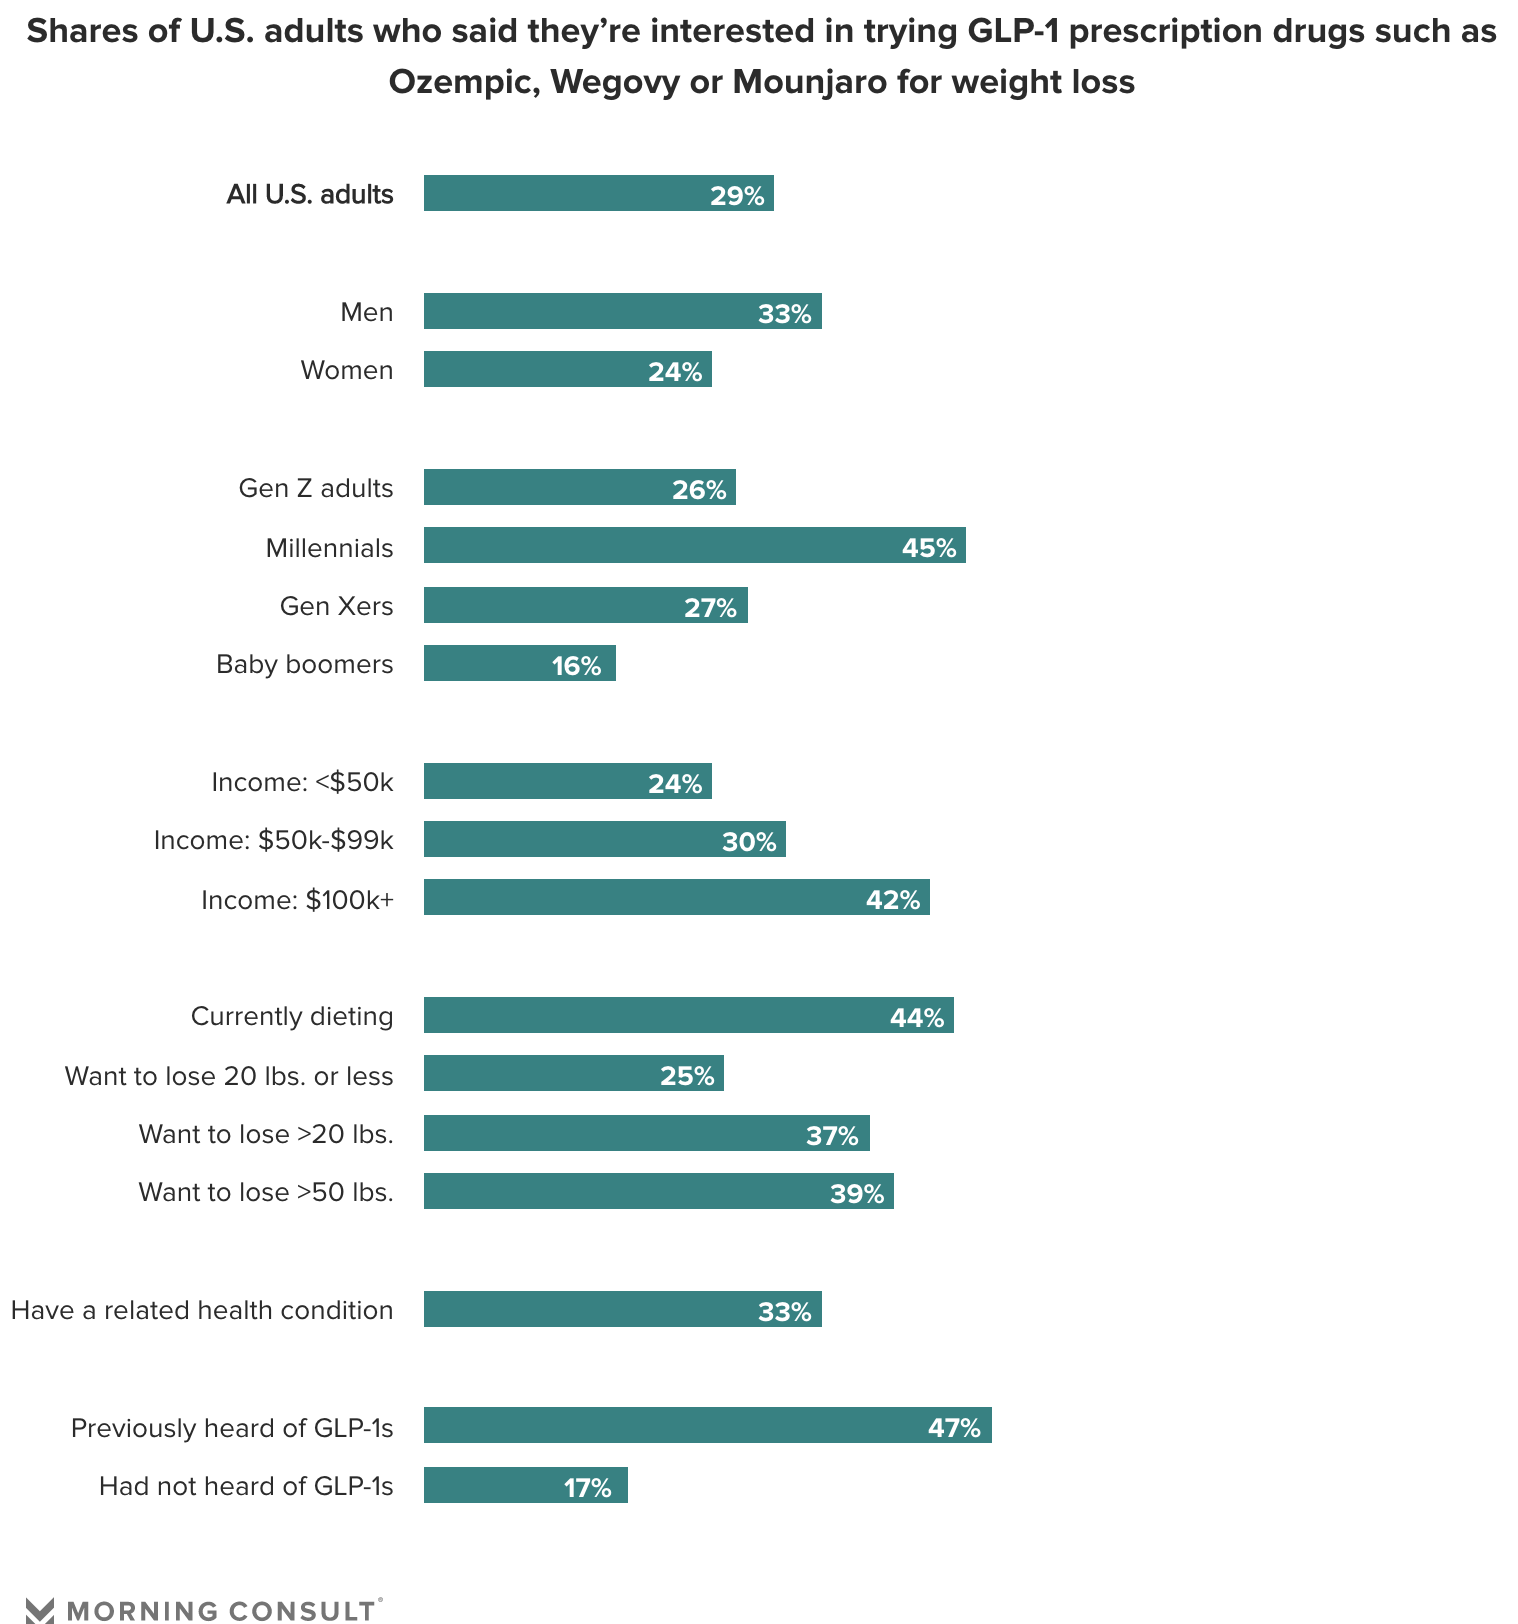 Shares of U.S. adults who said theyre interested in trying GLP-1 prescription drugs such as Ozempic, Wegovy or Mounjaro for weight loss AllU.S. adults 29% Men 33% Women 24% Gen Z adults 26% Millennials 45% Gen Xers 27% Baby boomers 16% Income: $50k pLYA Income: $50k-$99k 30% Income: $100k L3A Currently dieting 44% Want to lose 20 Ibs. or less Want to lose 20 Ibs. w 7y Want to lose 50 Ibs. 39% Have a related health condition 33% Previously heard of GLP-1s 47% N u S Had not heard of GLP-1s i V MORNING CONSULT 